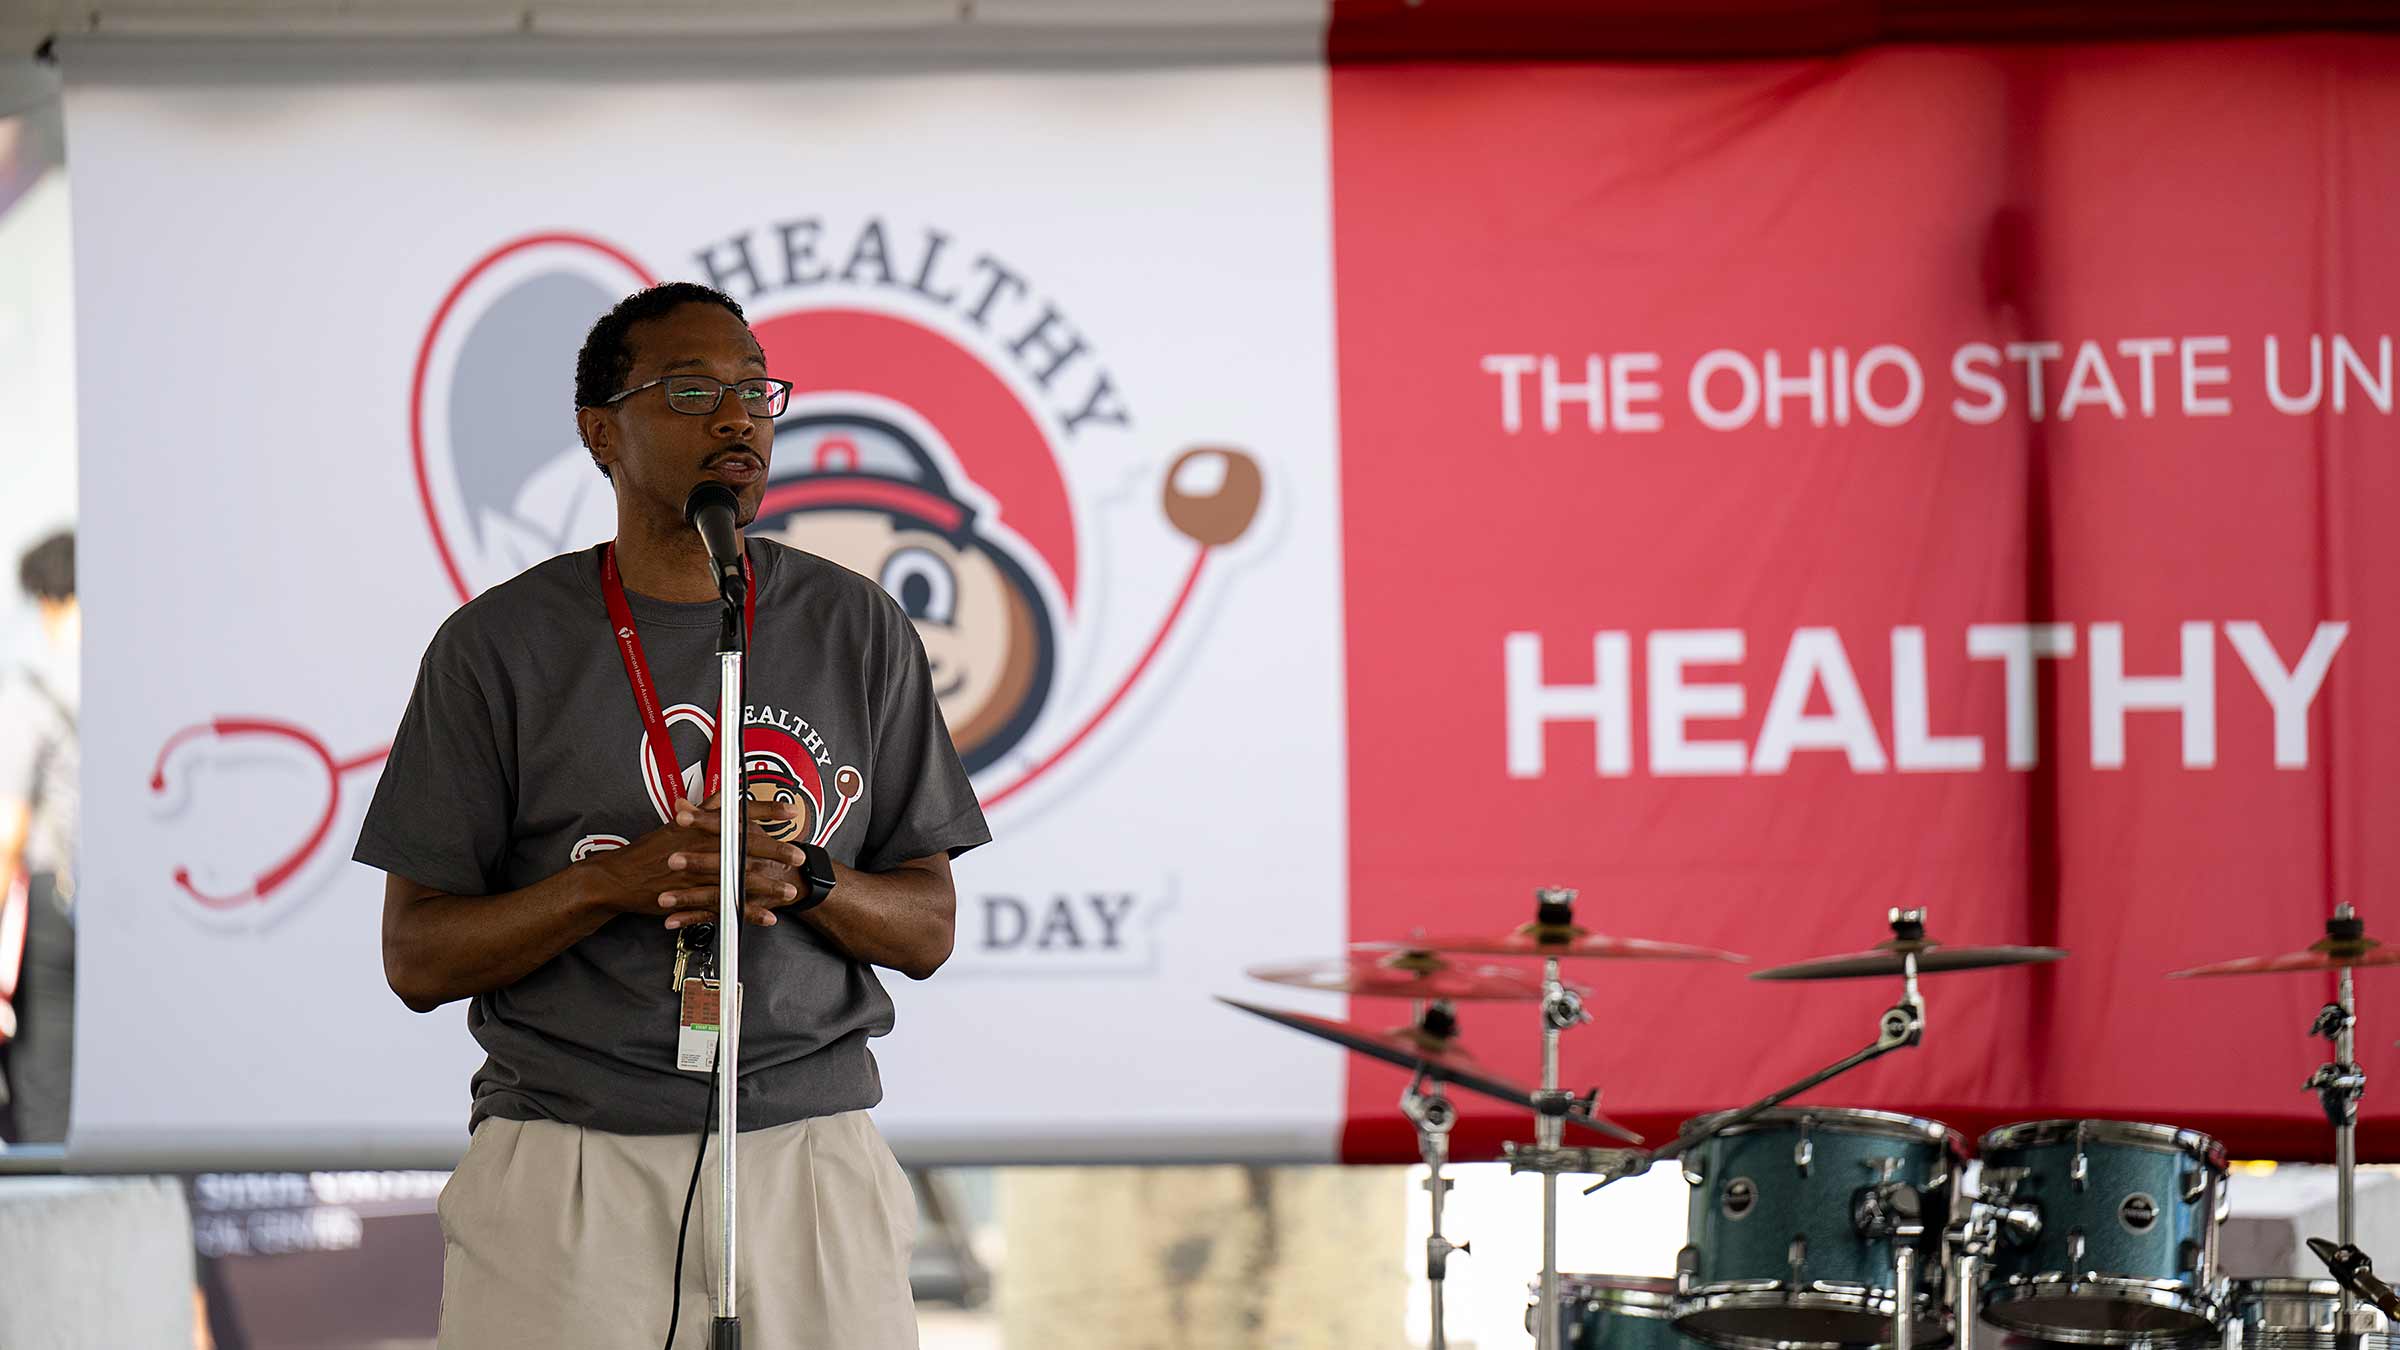 Dr. Joseph speaking at the Healthy Community Day